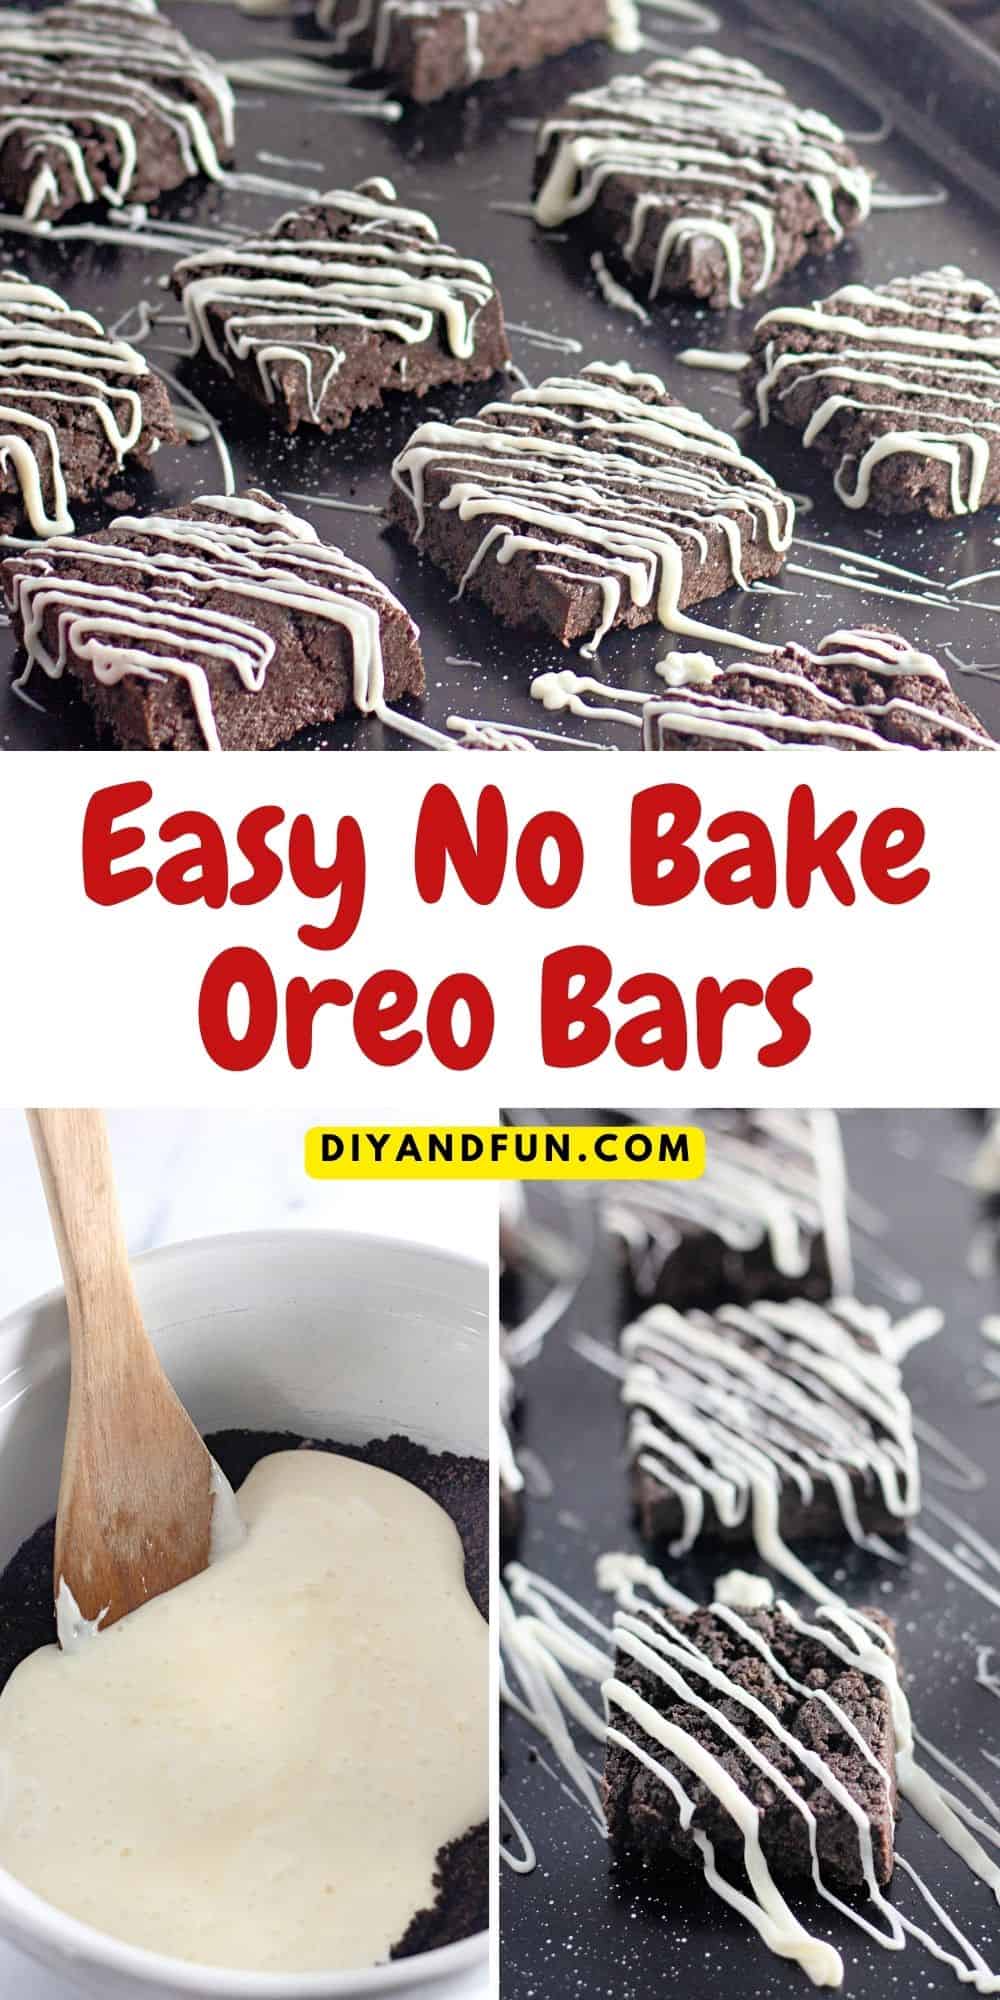 The Best Easy No Bake Oreo Bars, it takes about 10 minutes and four ingredients to turn sandwich cookies into a chocolatey dessert treat.